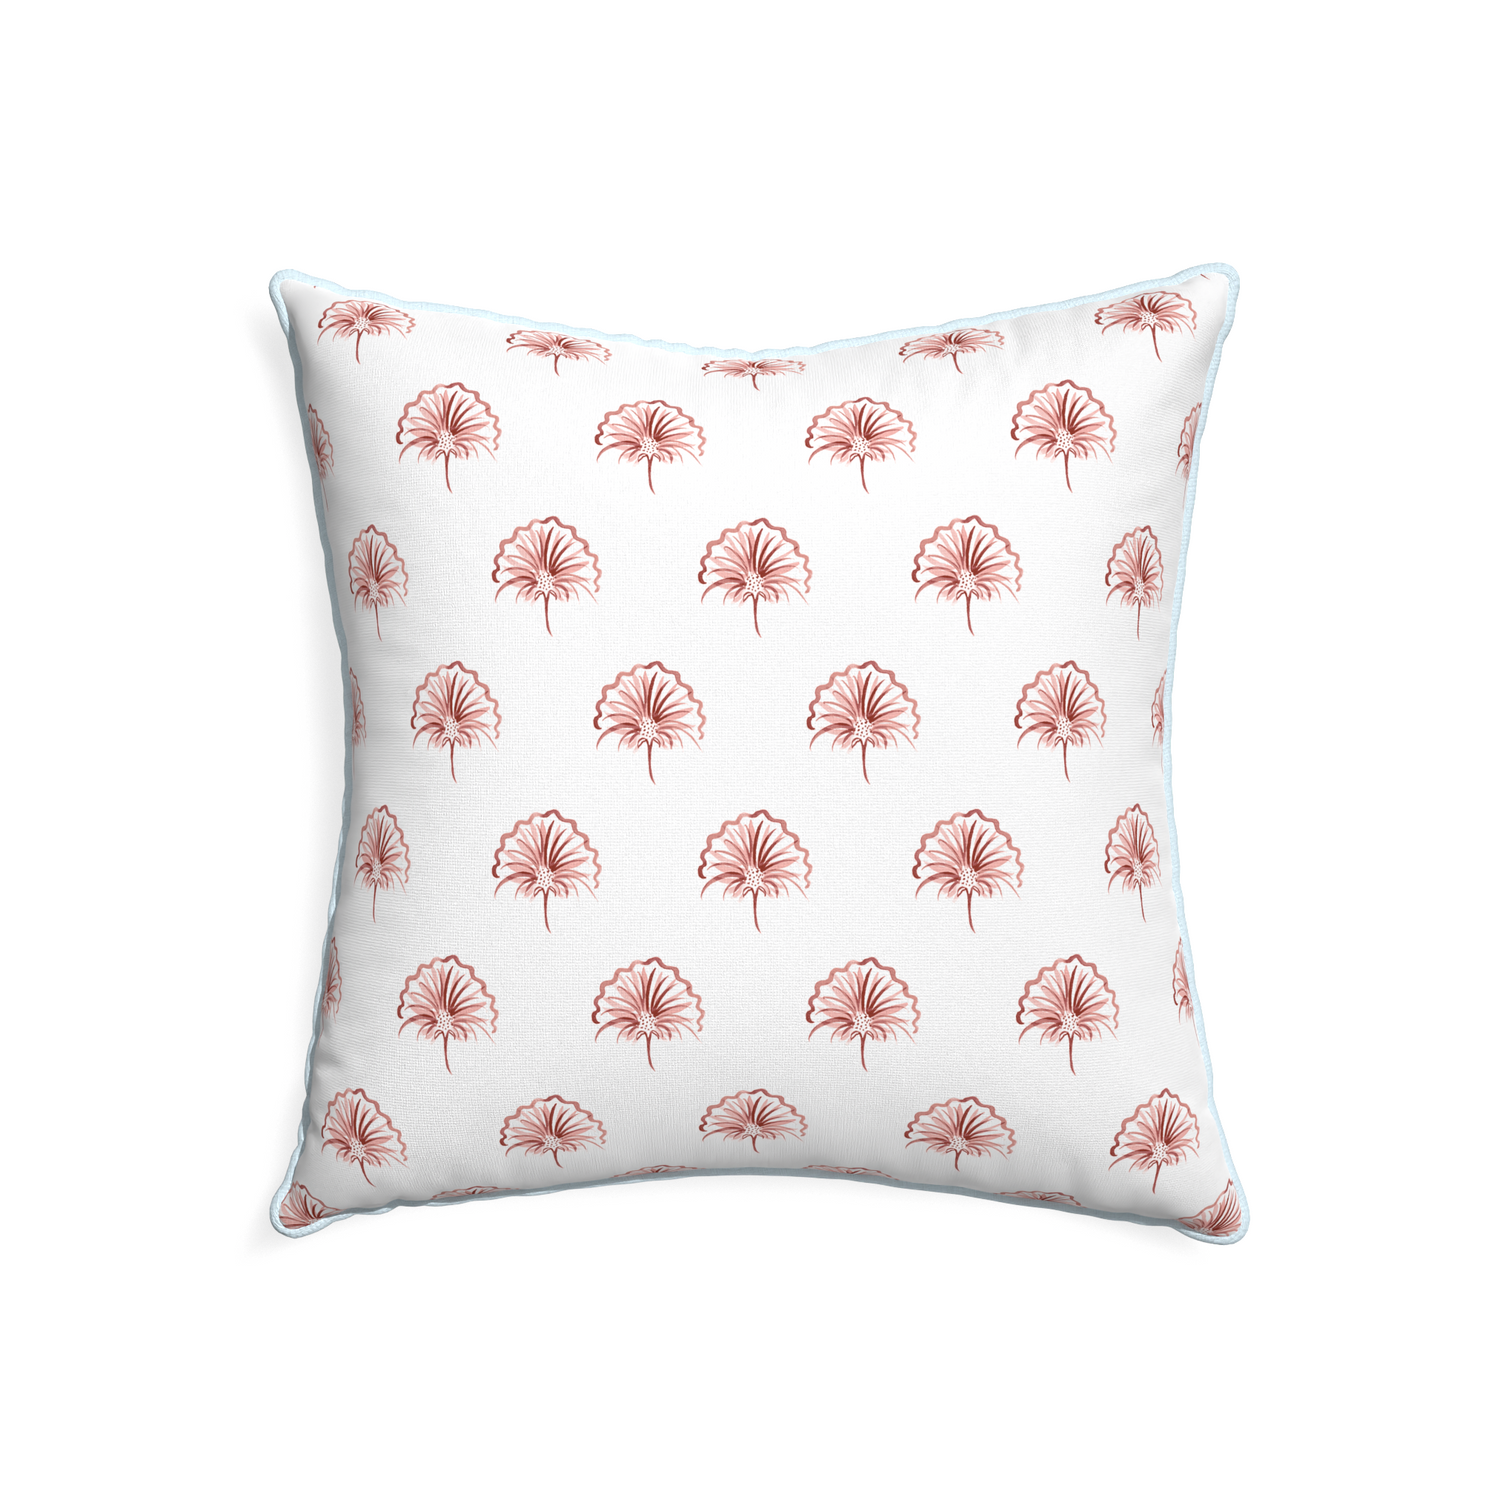 22-square penelope rose custom pillow with powder piping on white background